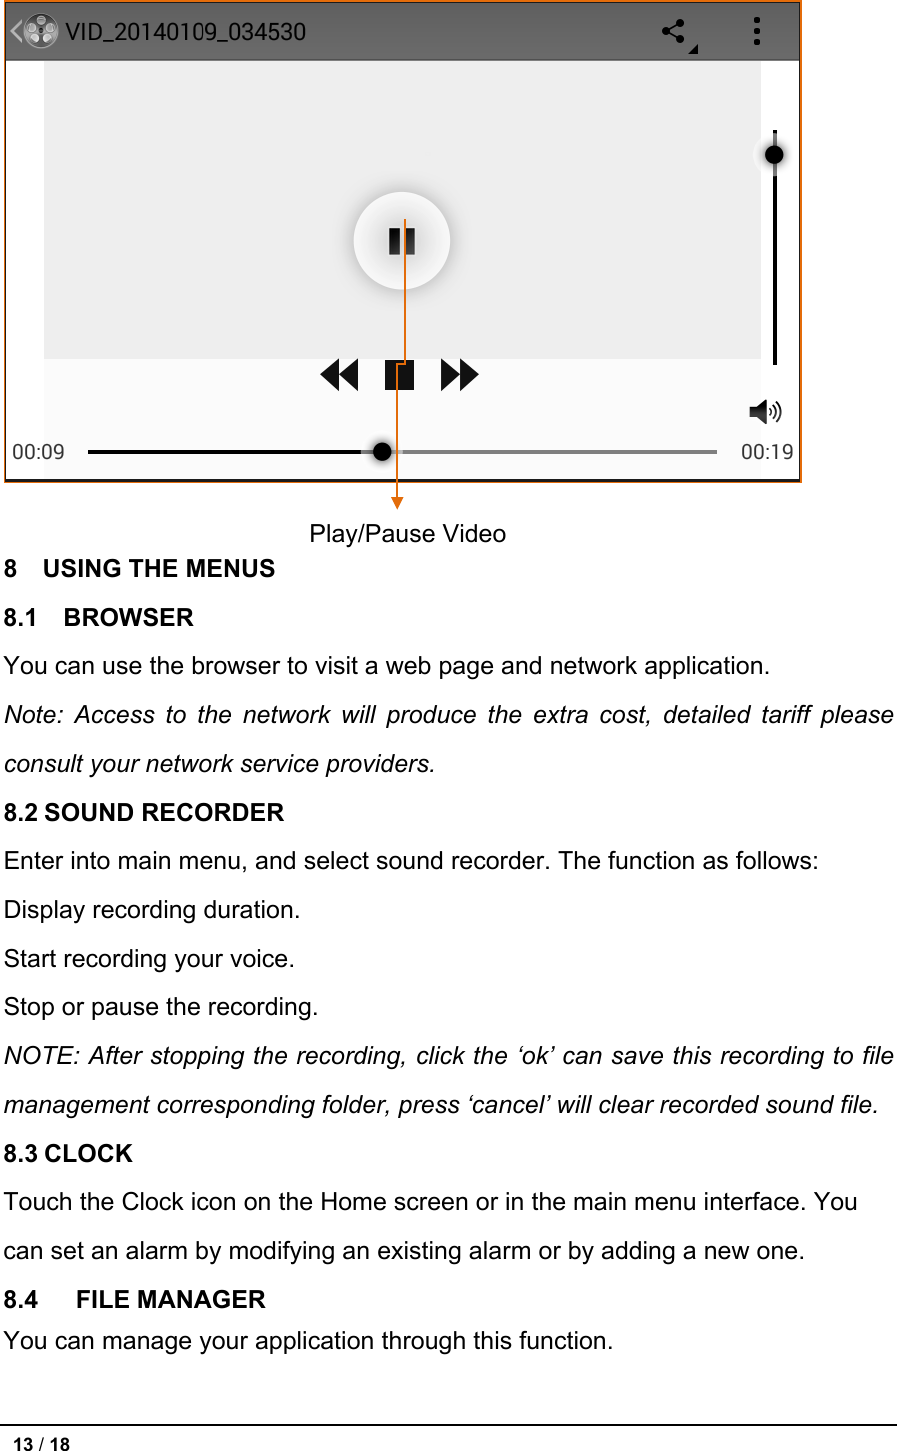   8  USING THE MENUS 8.1  BROWSER You can use the browser to visit a web page and network application. Note:  Access to the network will produce the extra cost, detailed tariff please consult your network service providers. 8.2 SOUND RECORDER Enter into main menu, and select sound recorder. The function as follows:   Display recording duration.   Start recording your voice.   Stop or pause the recording. NOTE: After stopping the recording, click the ‘ok’ can save this recording to file management corresponding folder, press ‘cancel’ will clear recorded sound file. 8.3 CLOCK Touch the Clock icon on the Home screen or in the main menu interface. You can set an alarm by modifying an existing alarm or by adding a new one. 8.4   FILE MANAGER You can manage your application through this function.  Play/Pause Video  13 / 18   